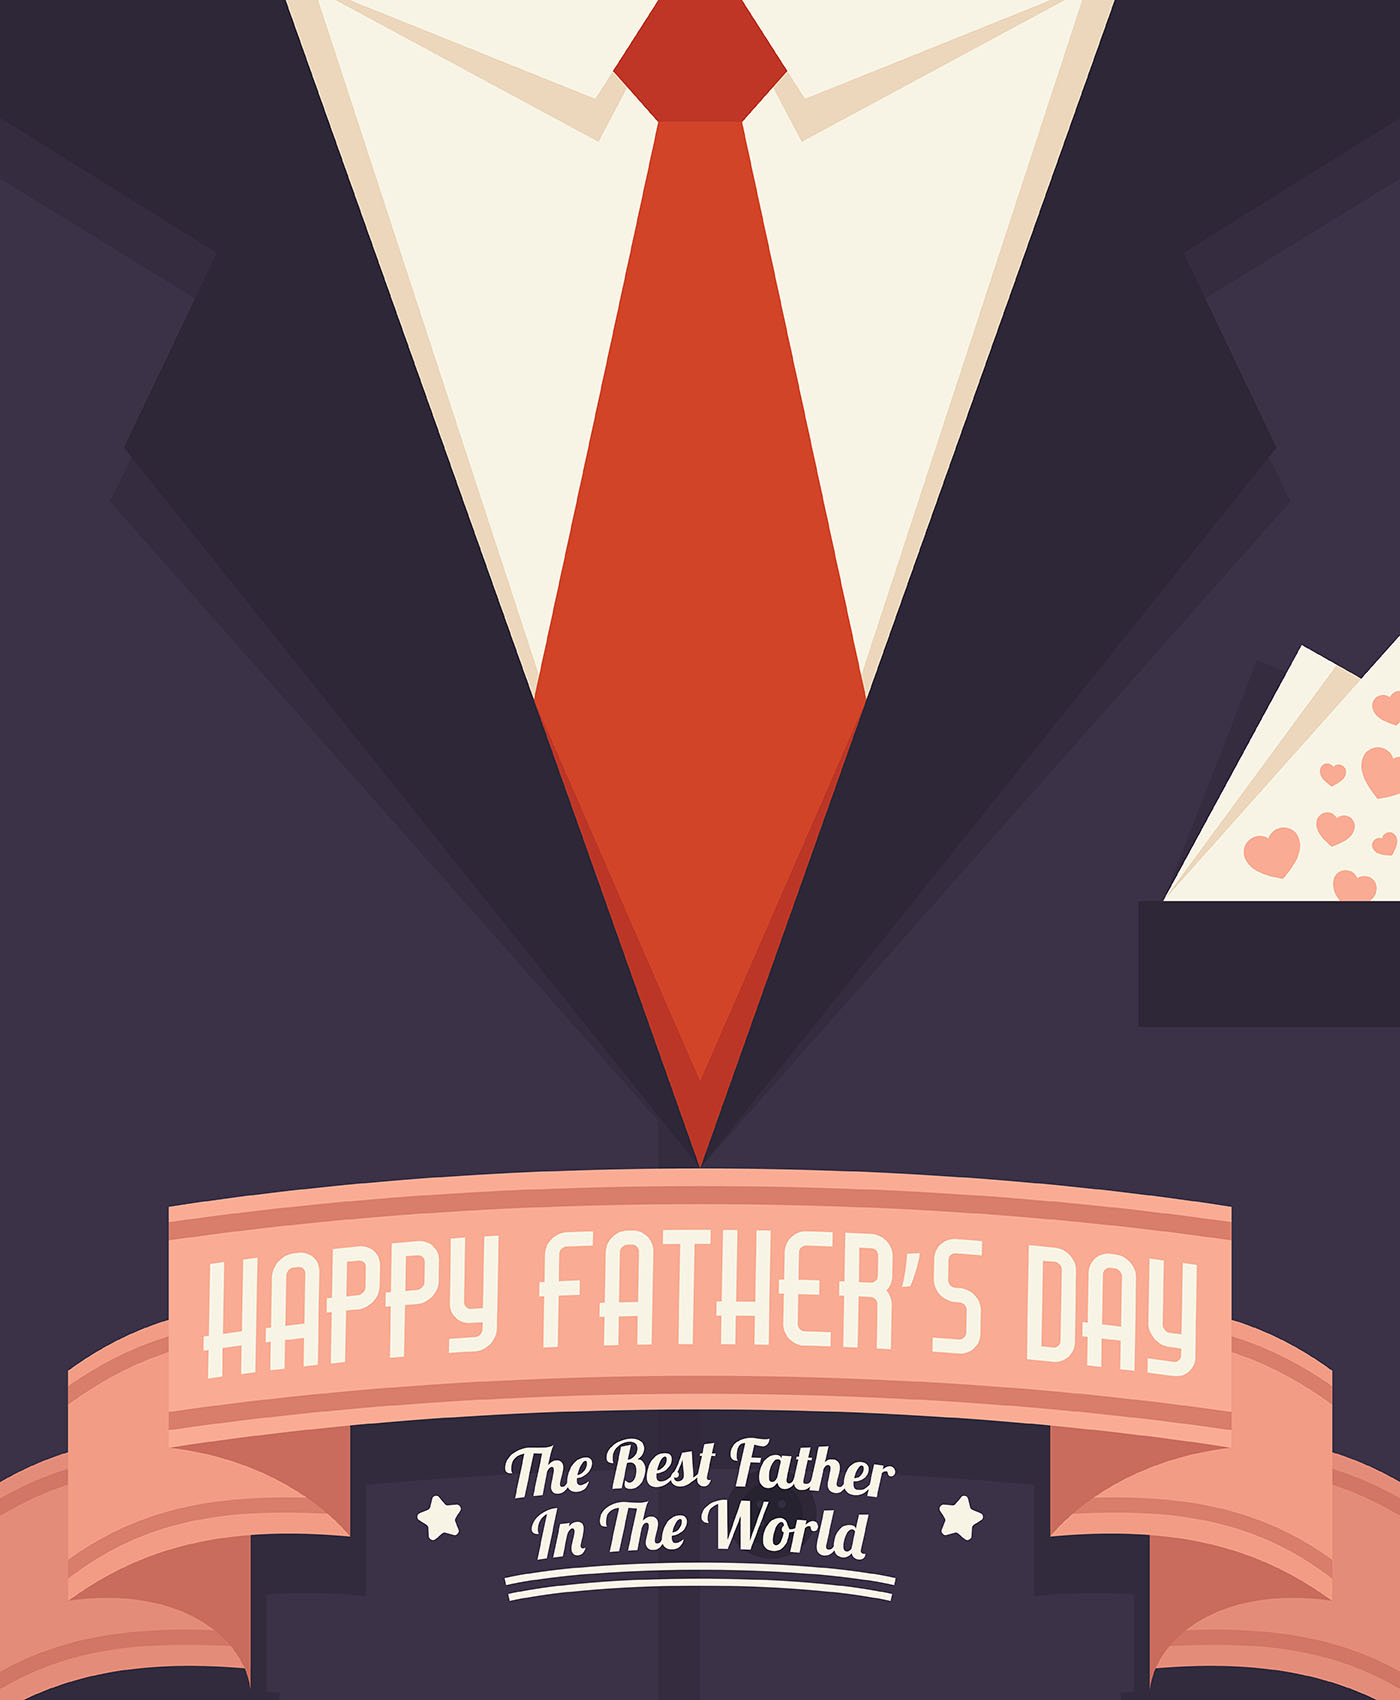 Download Happy Fathers Day Illustration 206092 - Download Free ...